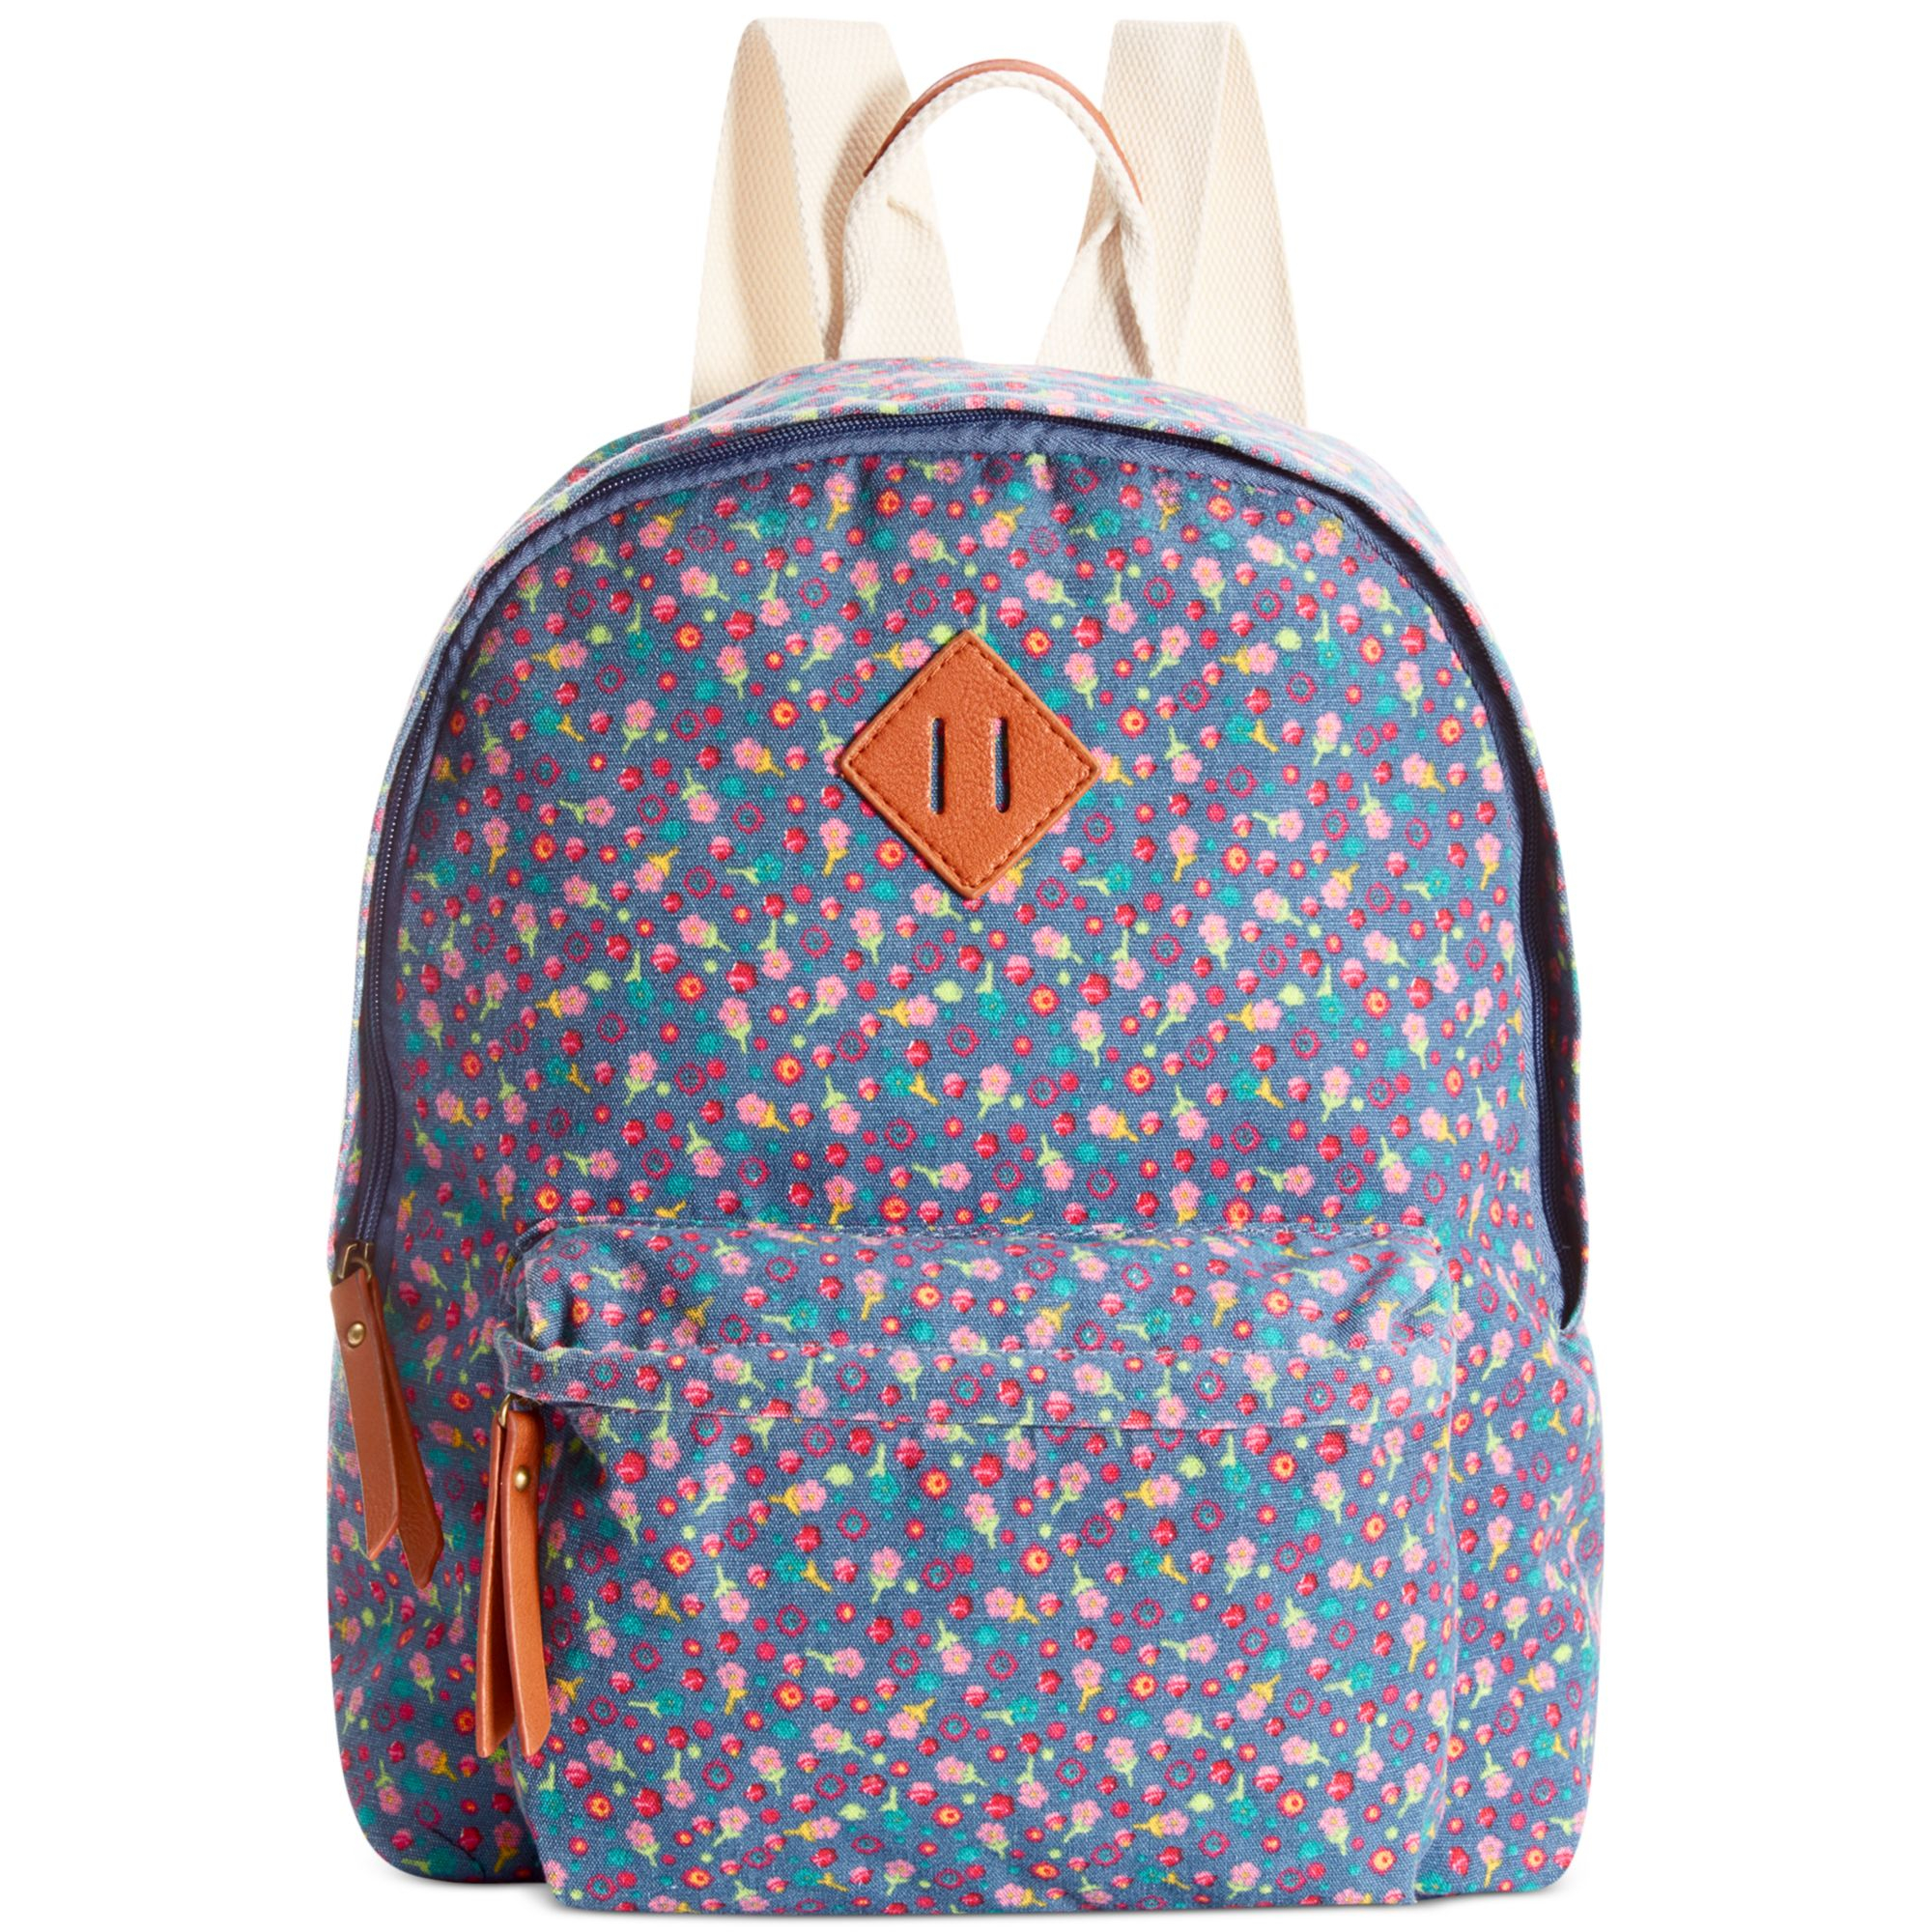 Madden Girl Bklass Backpack in Blue (Blue Ditzy Floral) | Lyst